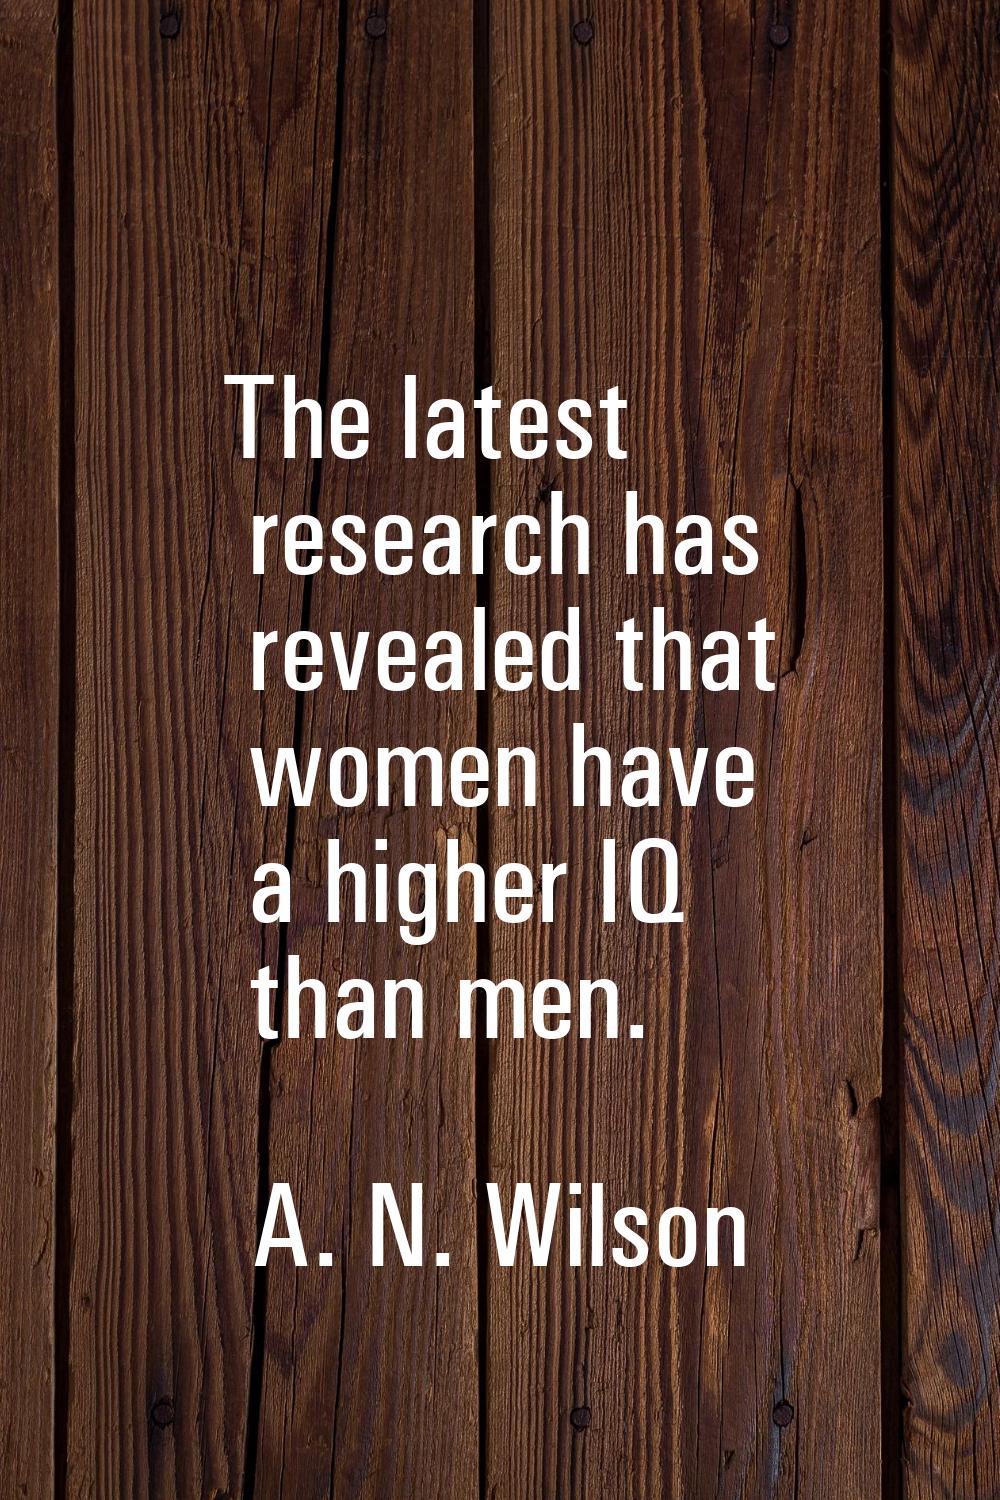 The latest research has revealed that women have a higher IQ than men.